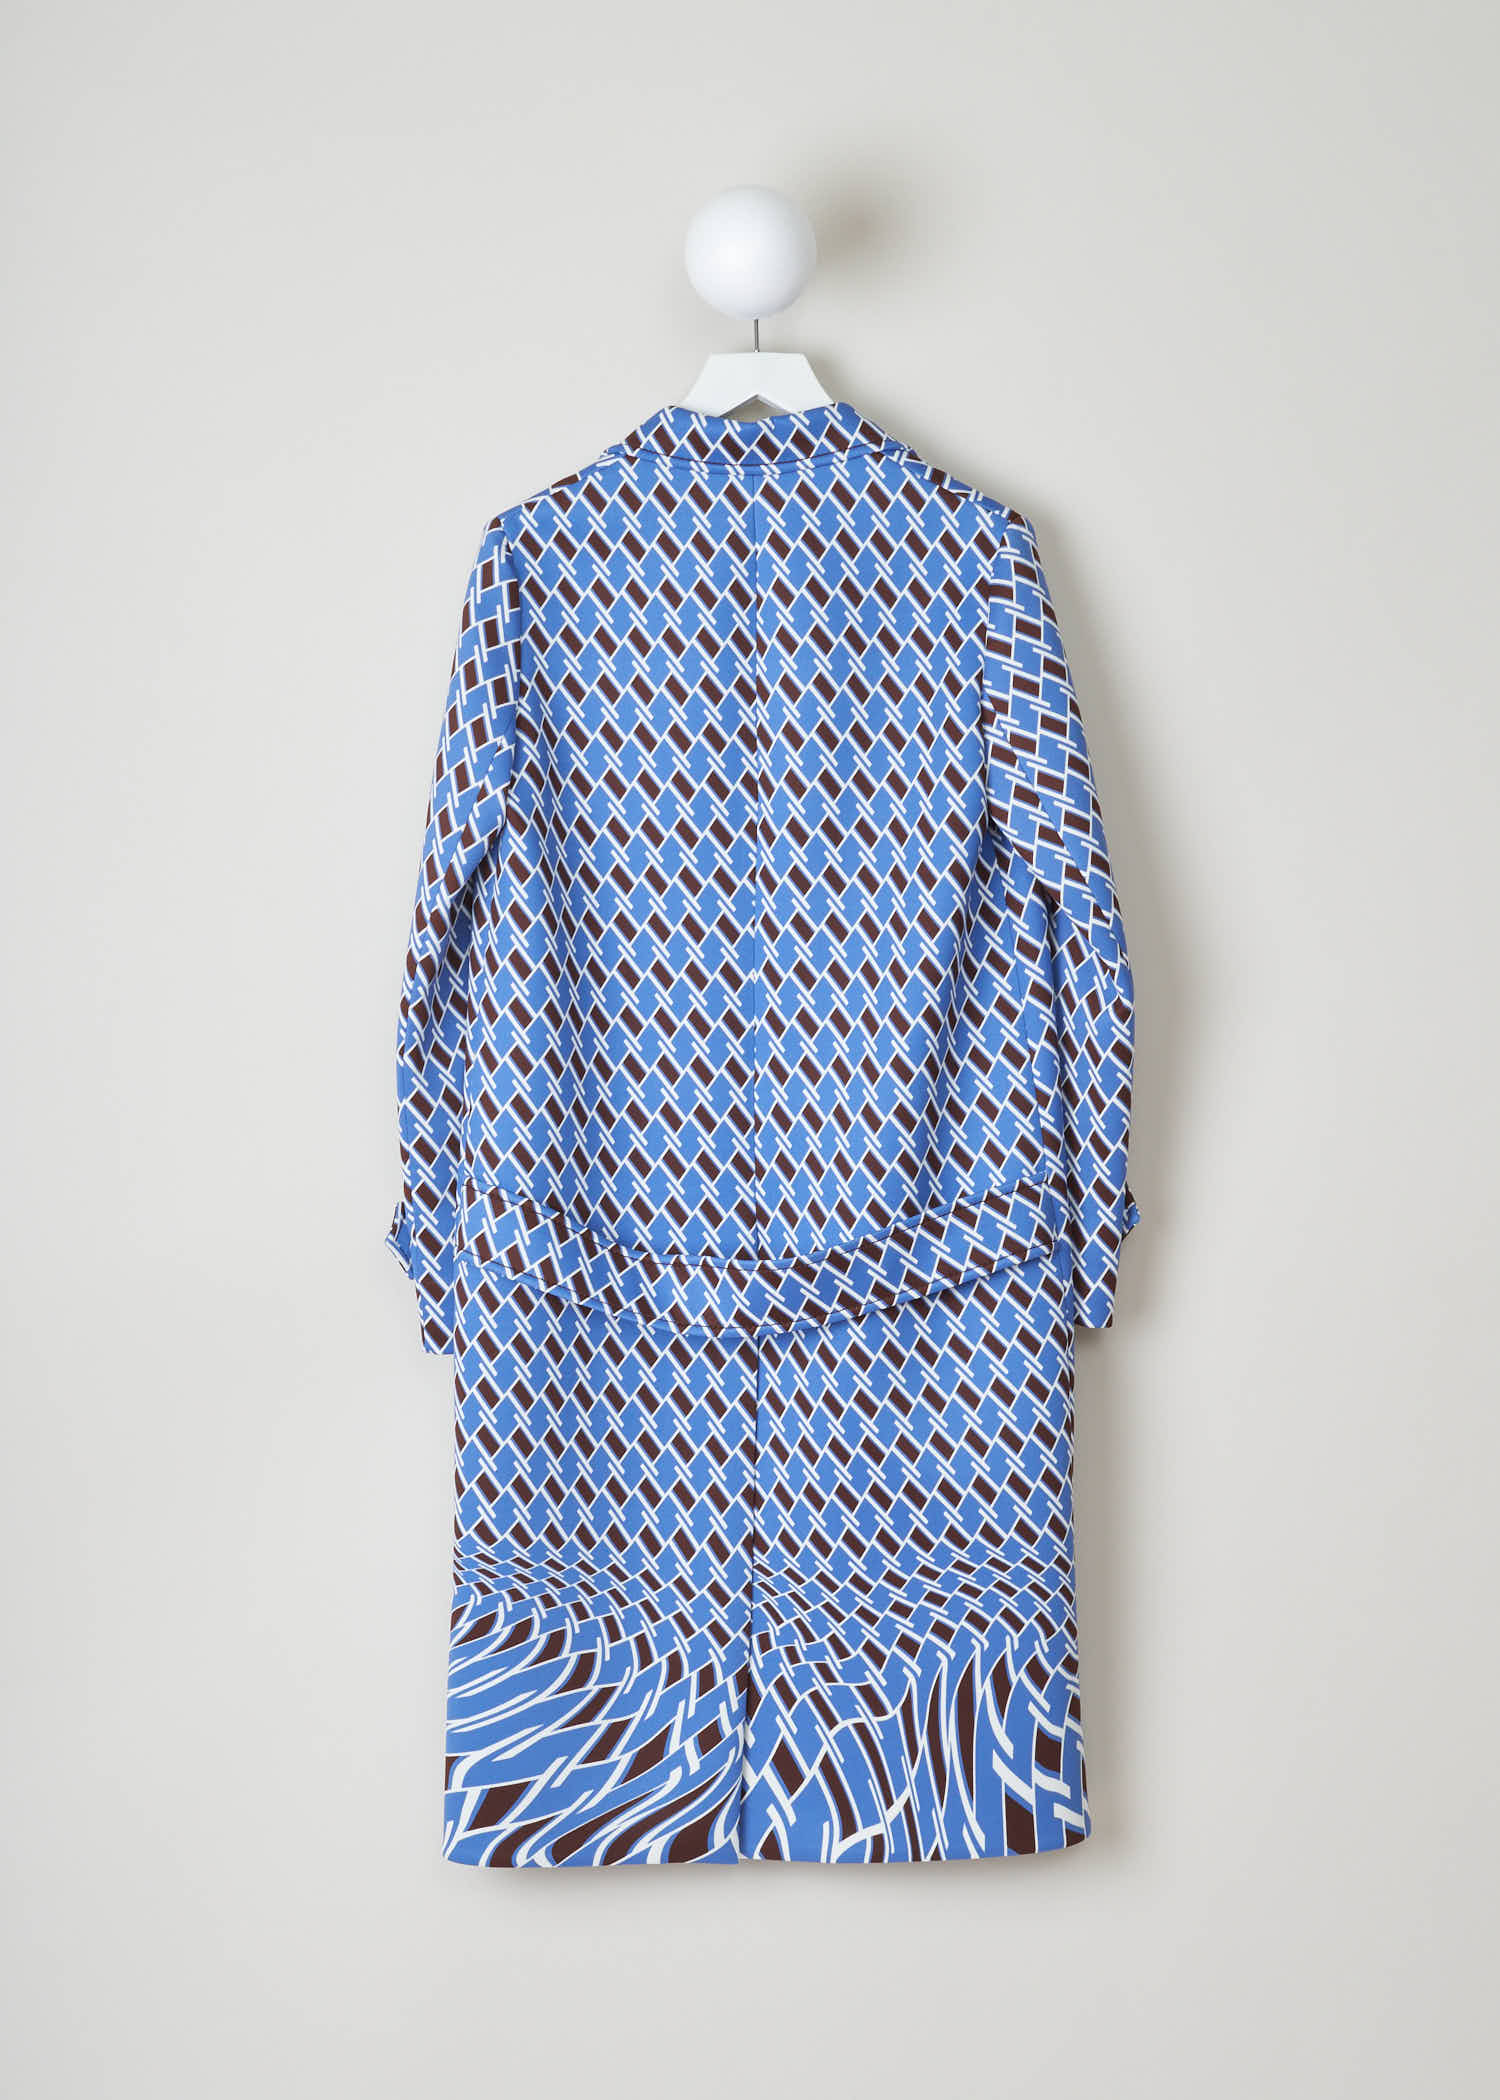 Prada tecno jersey argyle Tecno_Jersey_AR_P690II_F0237_Pervinca pervinca back. Geometric illusion-print coat in blue and brown from argyle printed techno jersey with button front fastening, flap pockets and belted cuffs.